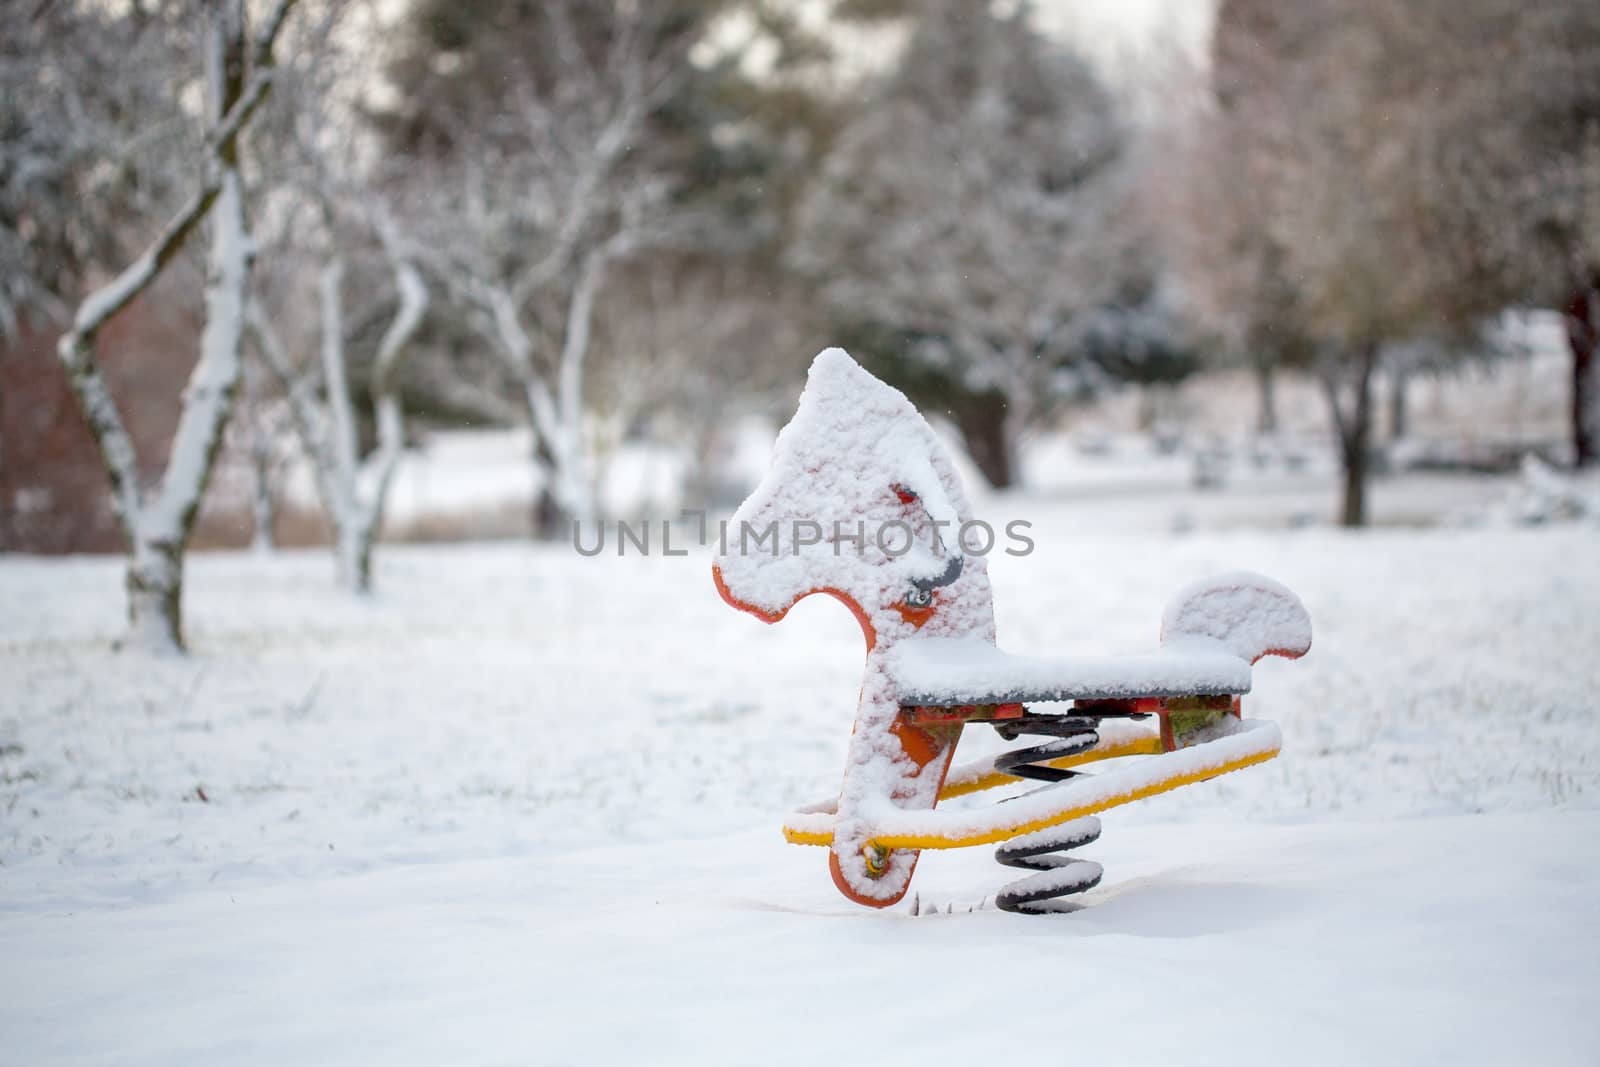 A childs playground toy covered in snow in outdoor park in Oberon Australia